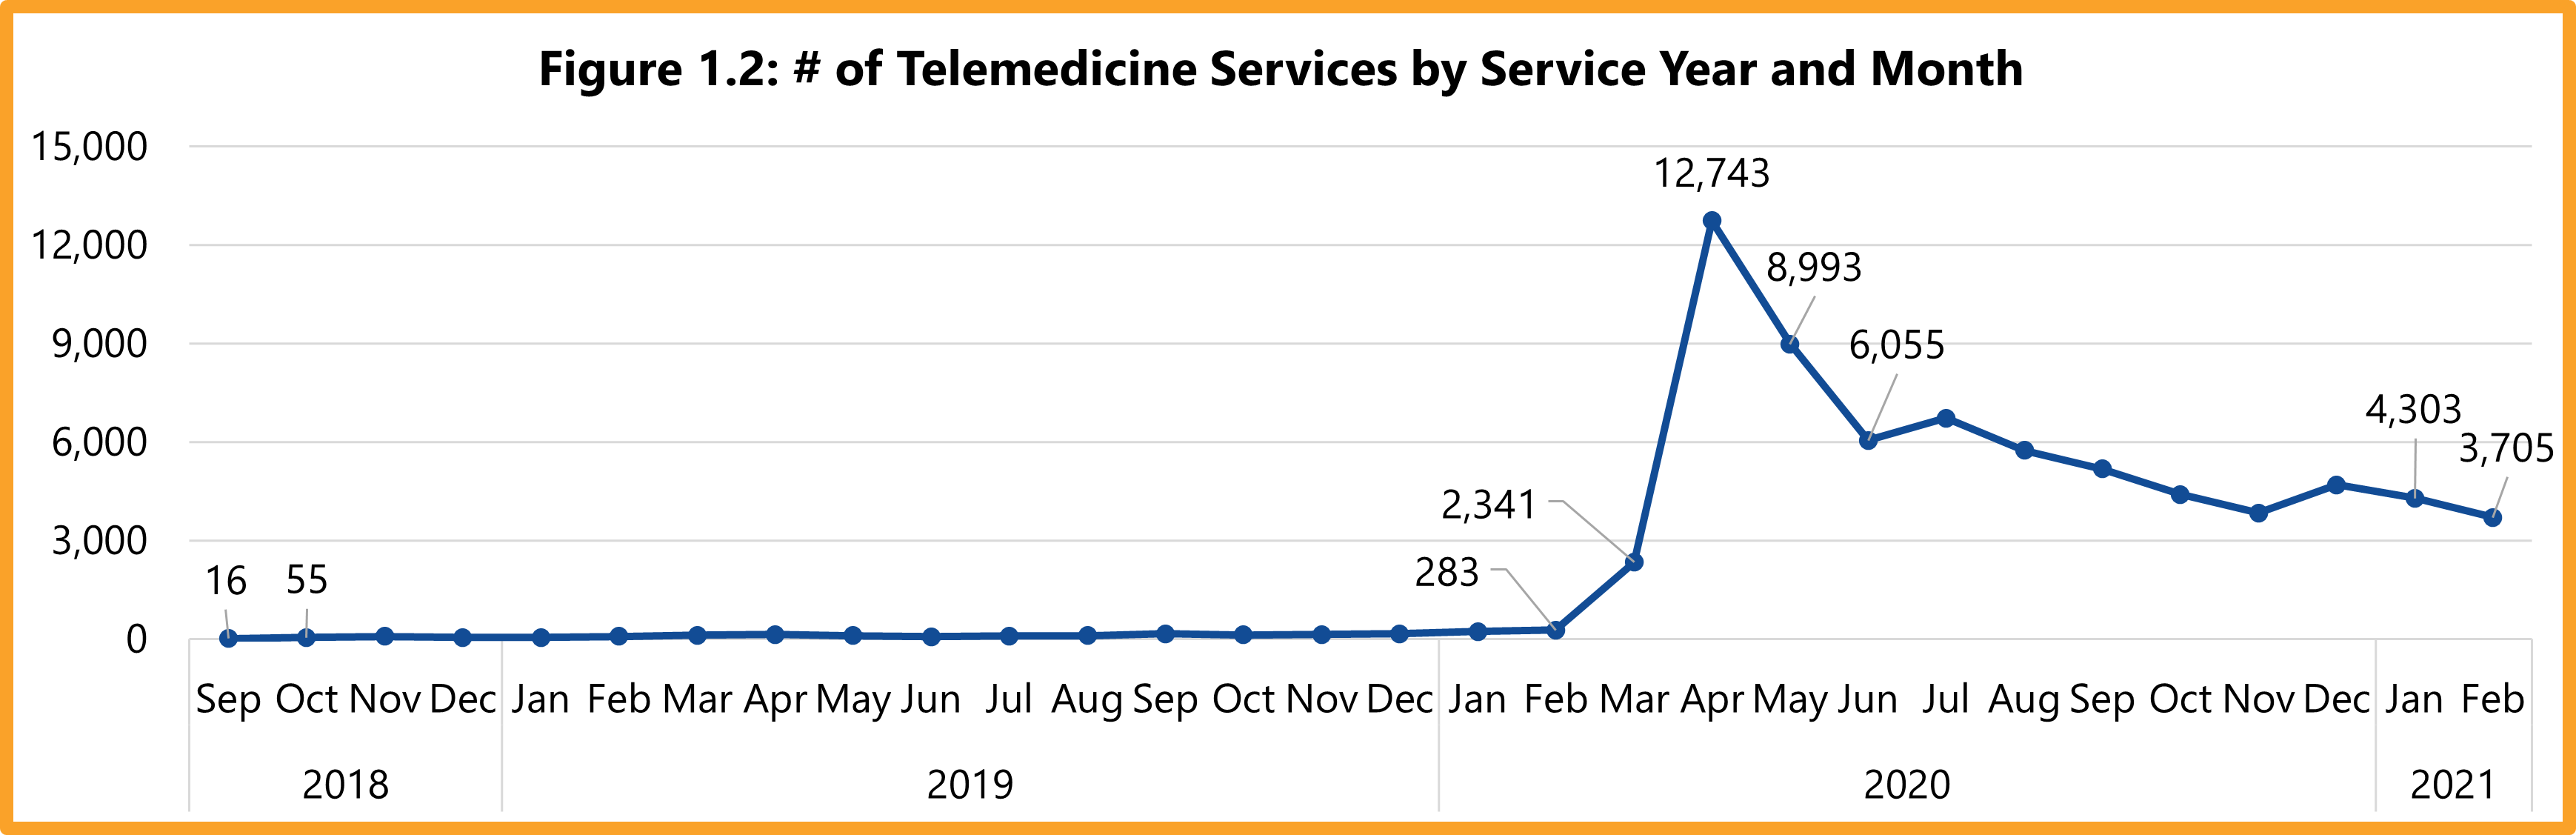 Number of telemedicine services by year and month, September 2018 (16 services) through February 2021 (3,705 services). The high point was April 2020 (12,743 services).